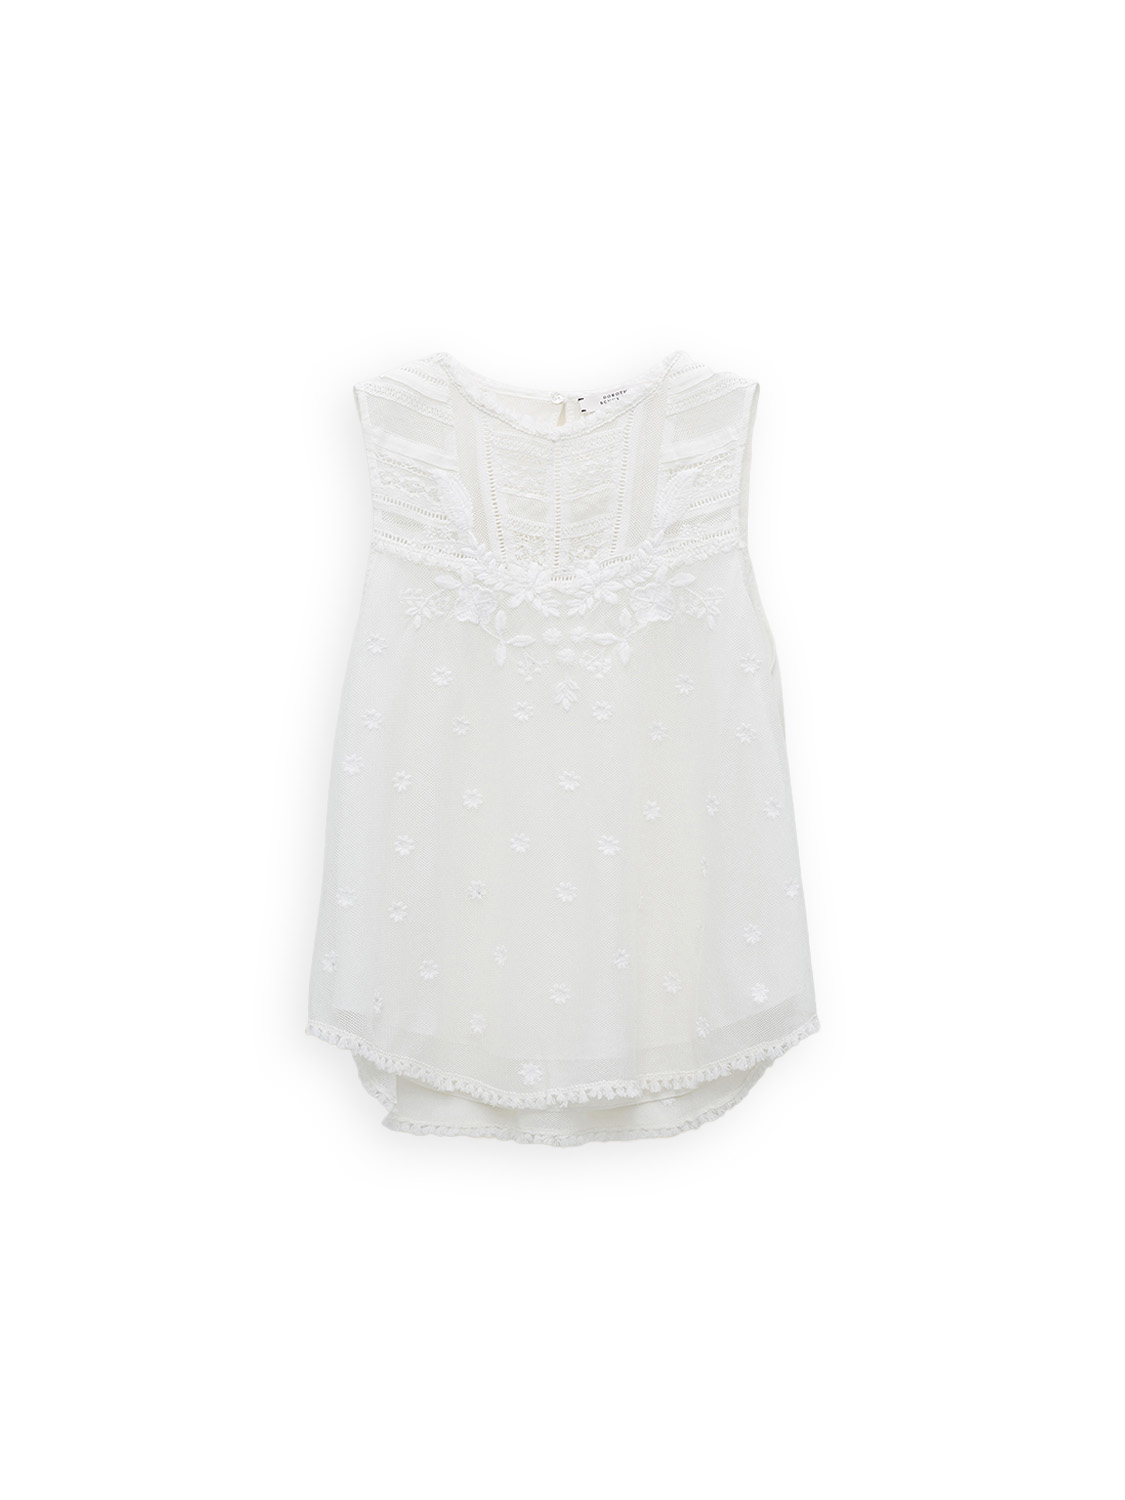 Dorothee Schumacher Stunning Dream – Blouse with lace  white XS